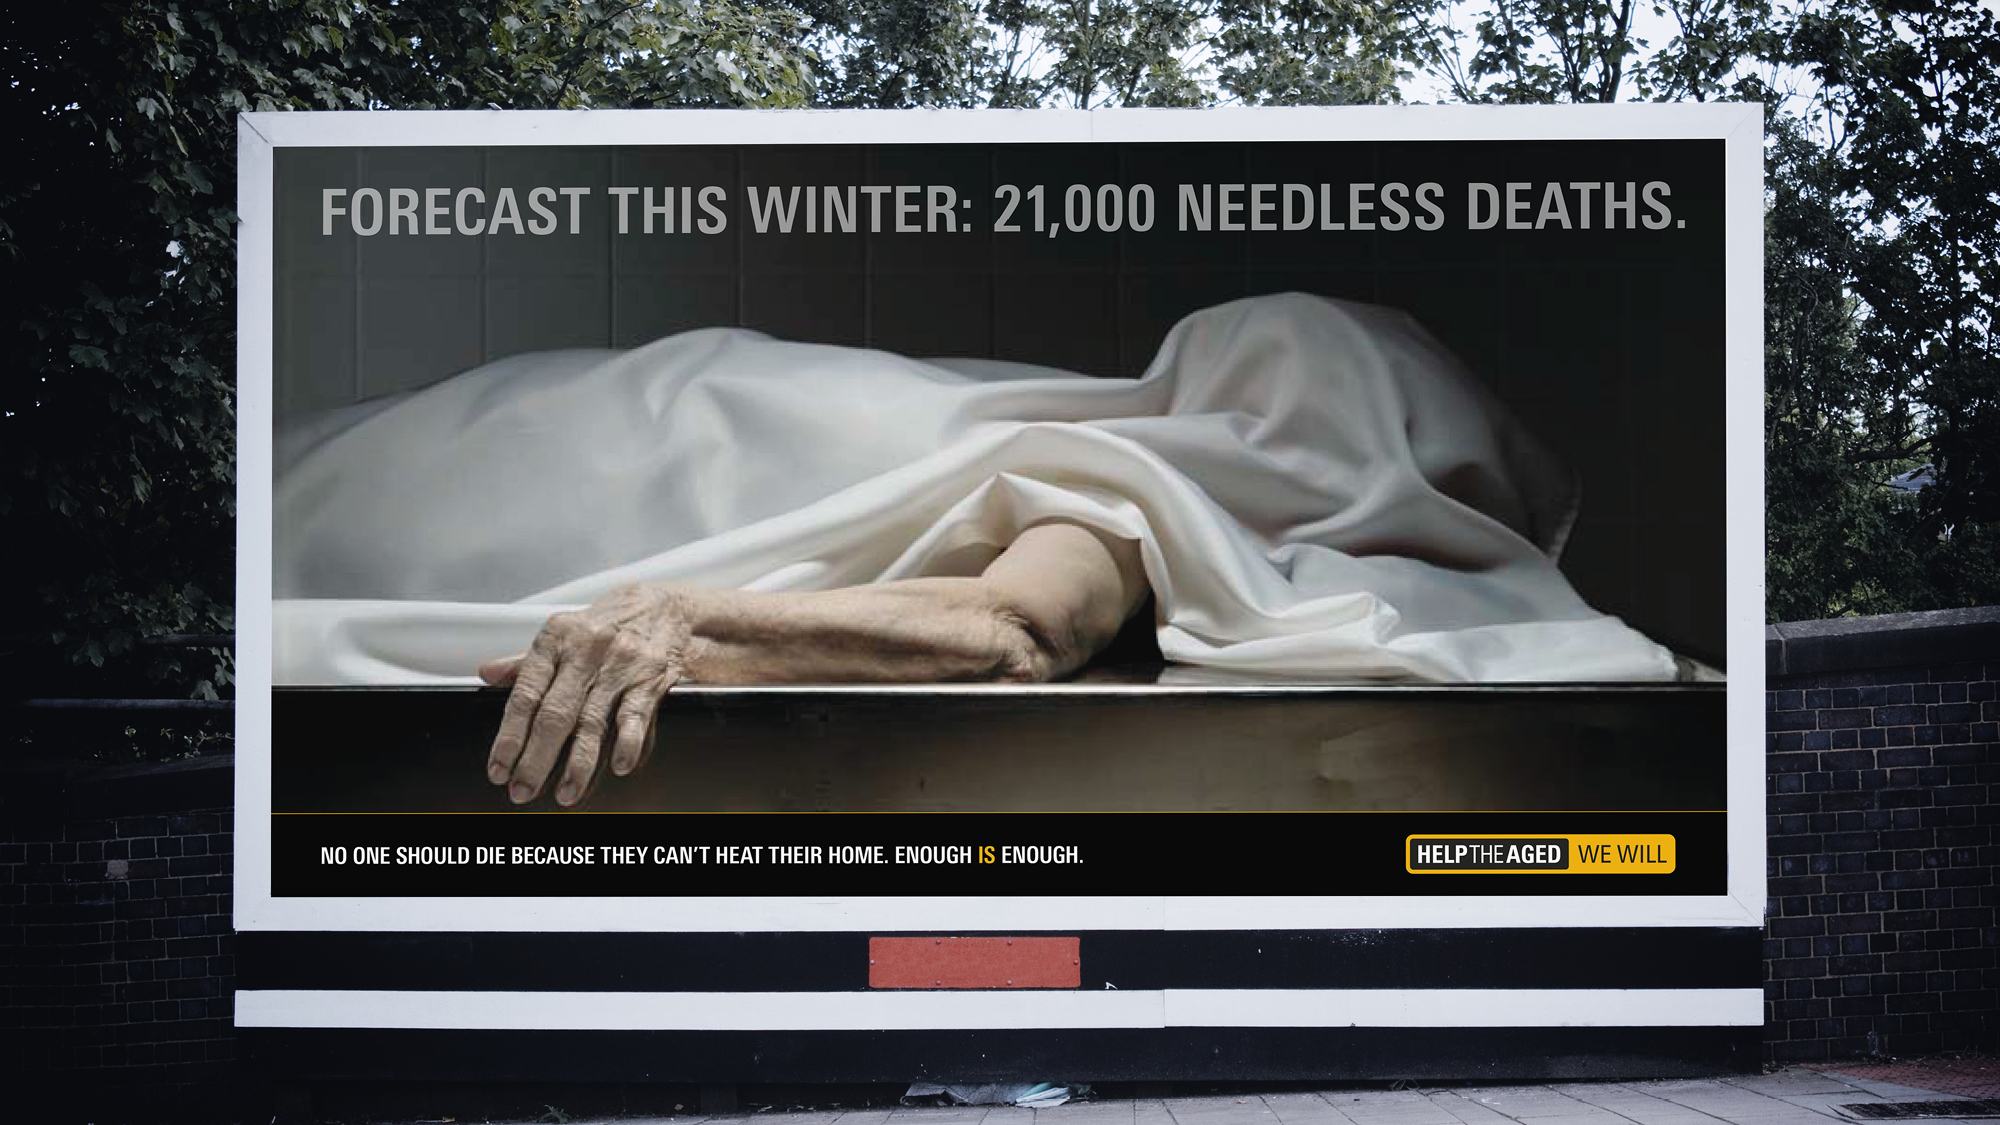 Entity-3-Three-Brand-Design-Agency-Sydney-Help-the-Aged-1-experience-winter-deaths-campaign-ooh-advertising